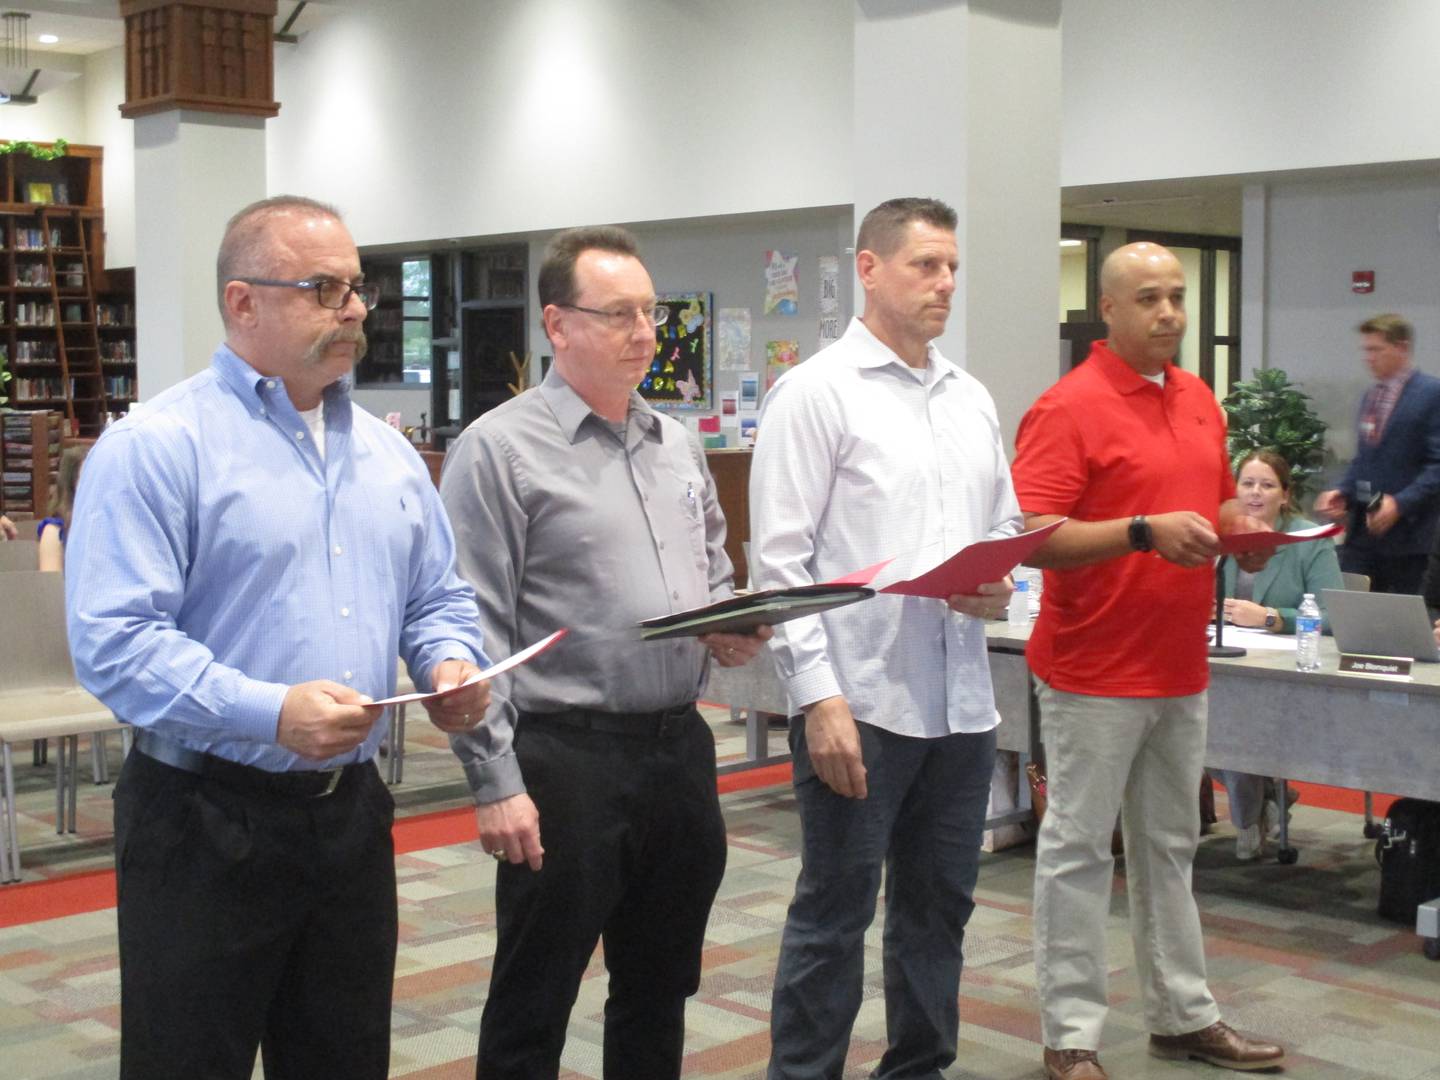 Four newly elected members of the Yorkville School District Y115 Board of Education prepare to take the oath of office on May 8, 2023 at the Yorkville High School library. They are, from left, Jason Demas, Darren Crawford, Michael Knoll and Michael Houston.